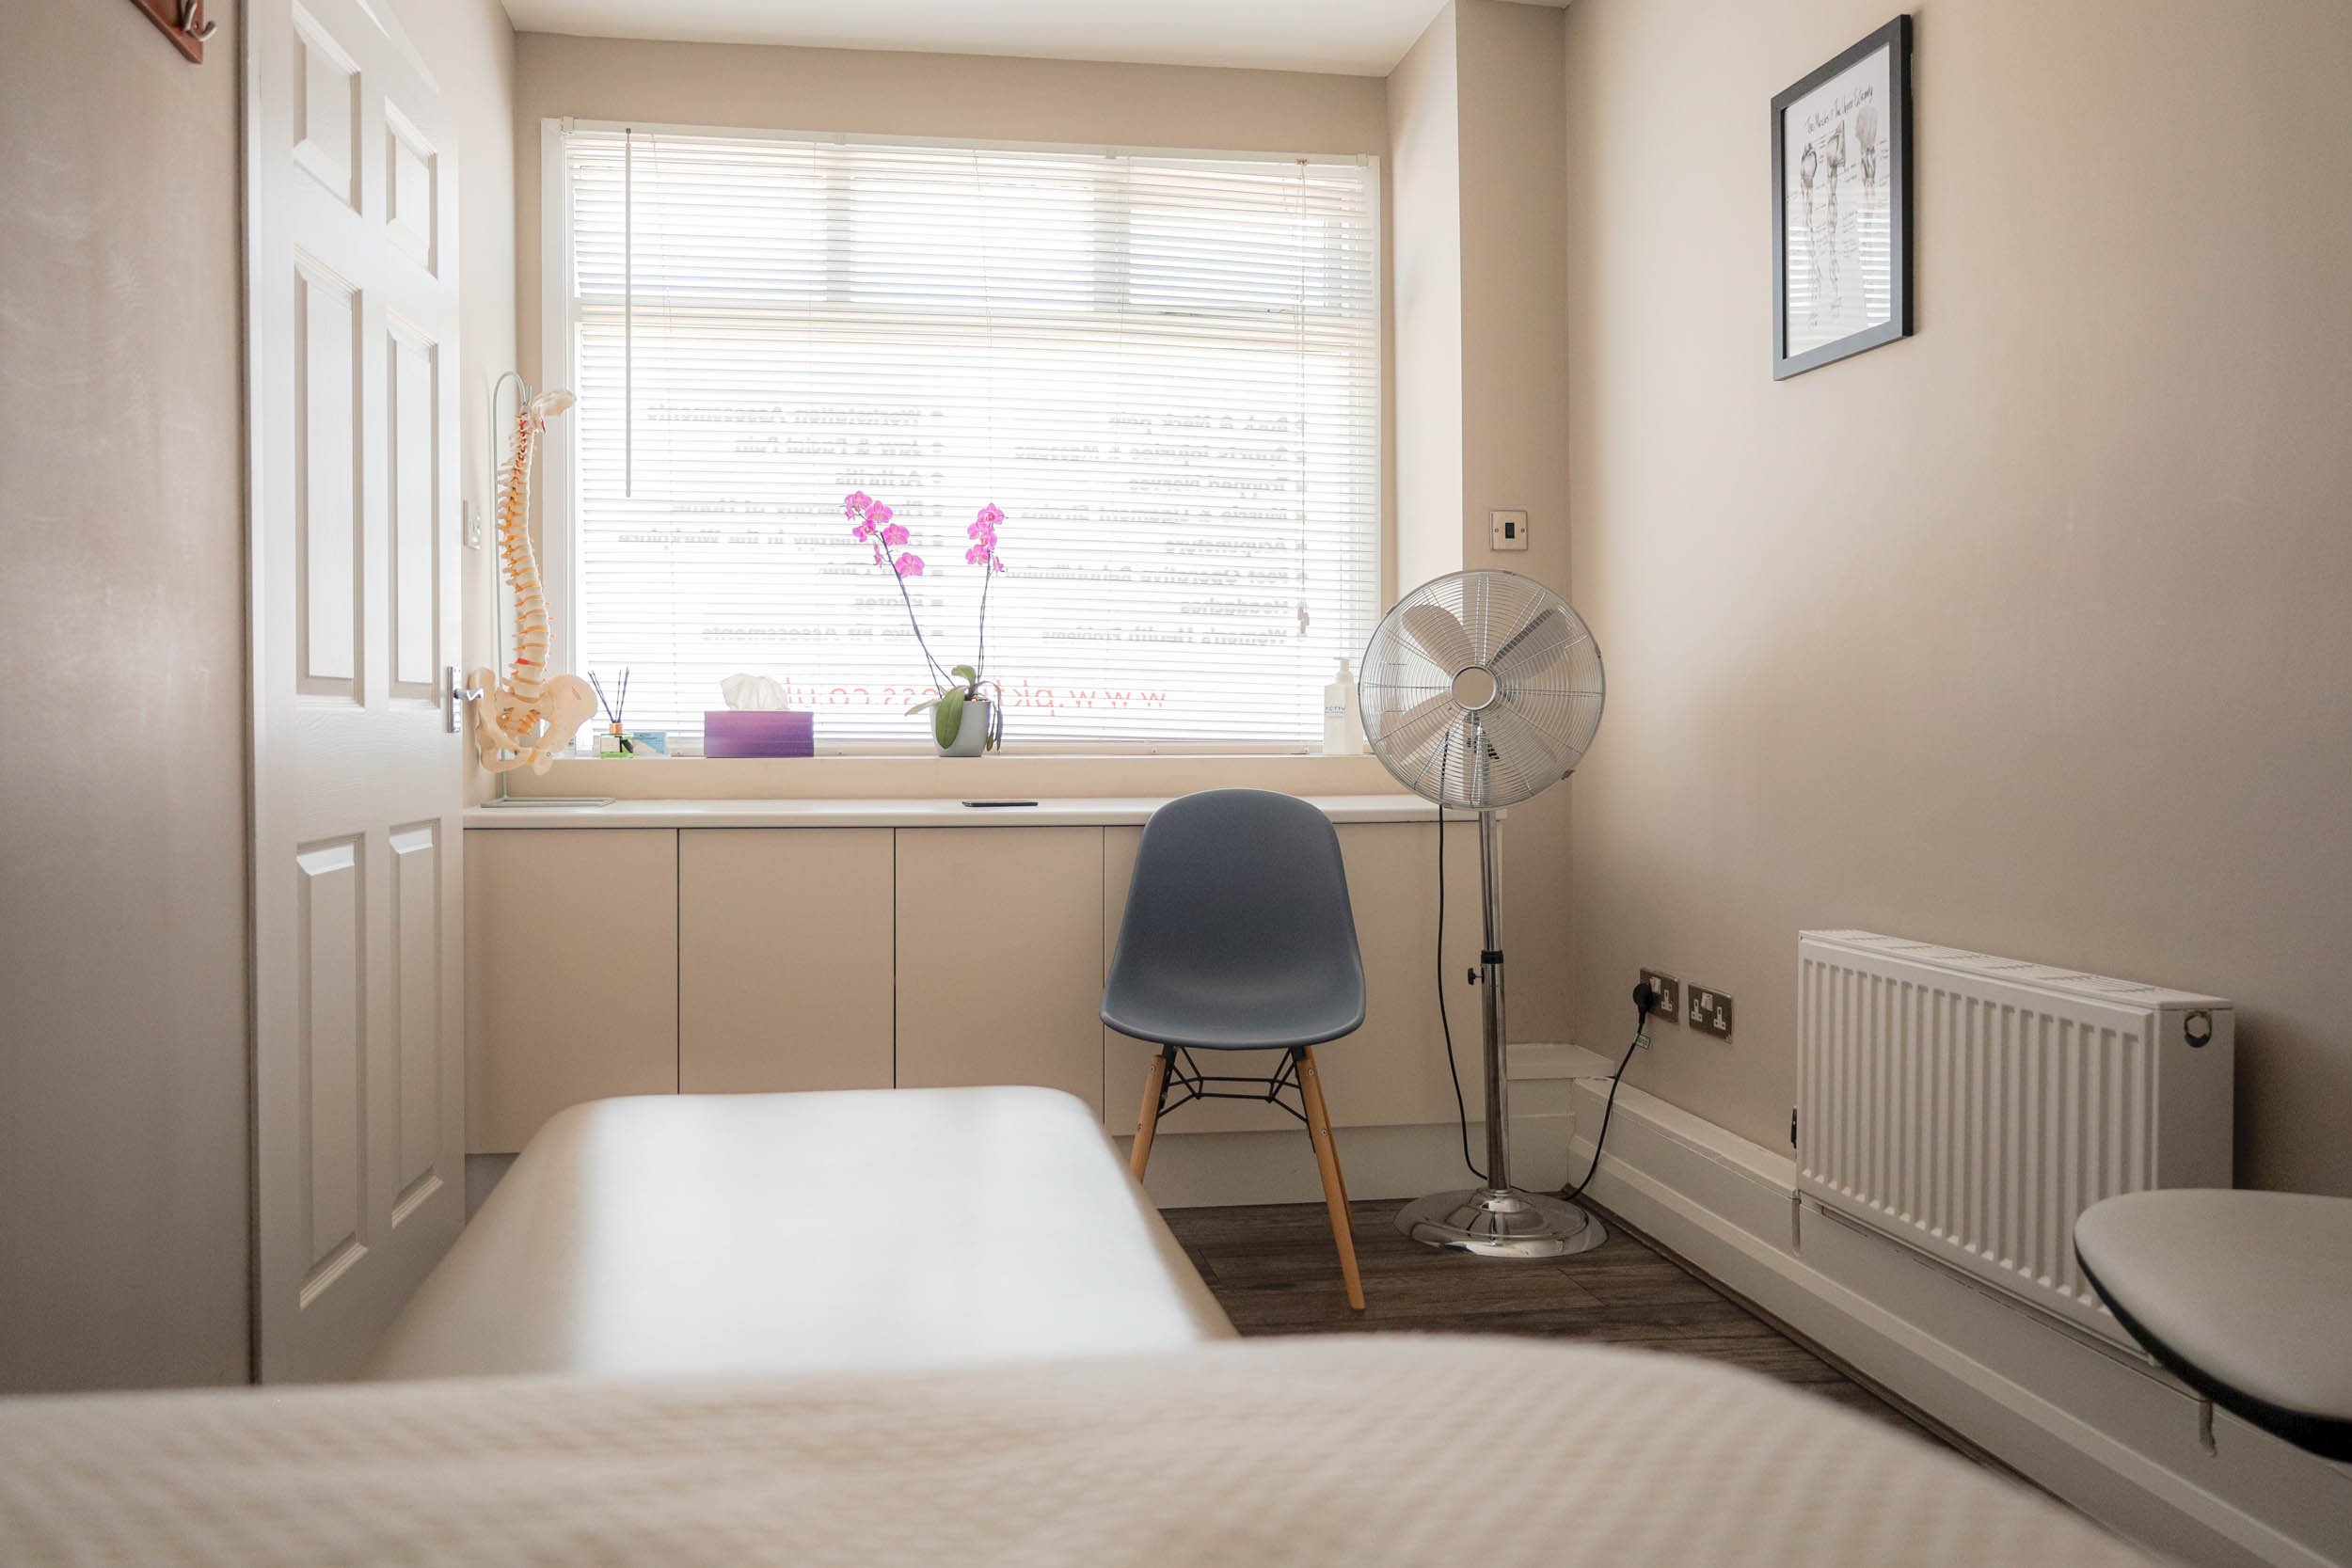 Physiotherapy room at Activ Physiotherapy clinic in Totley, Sheffield